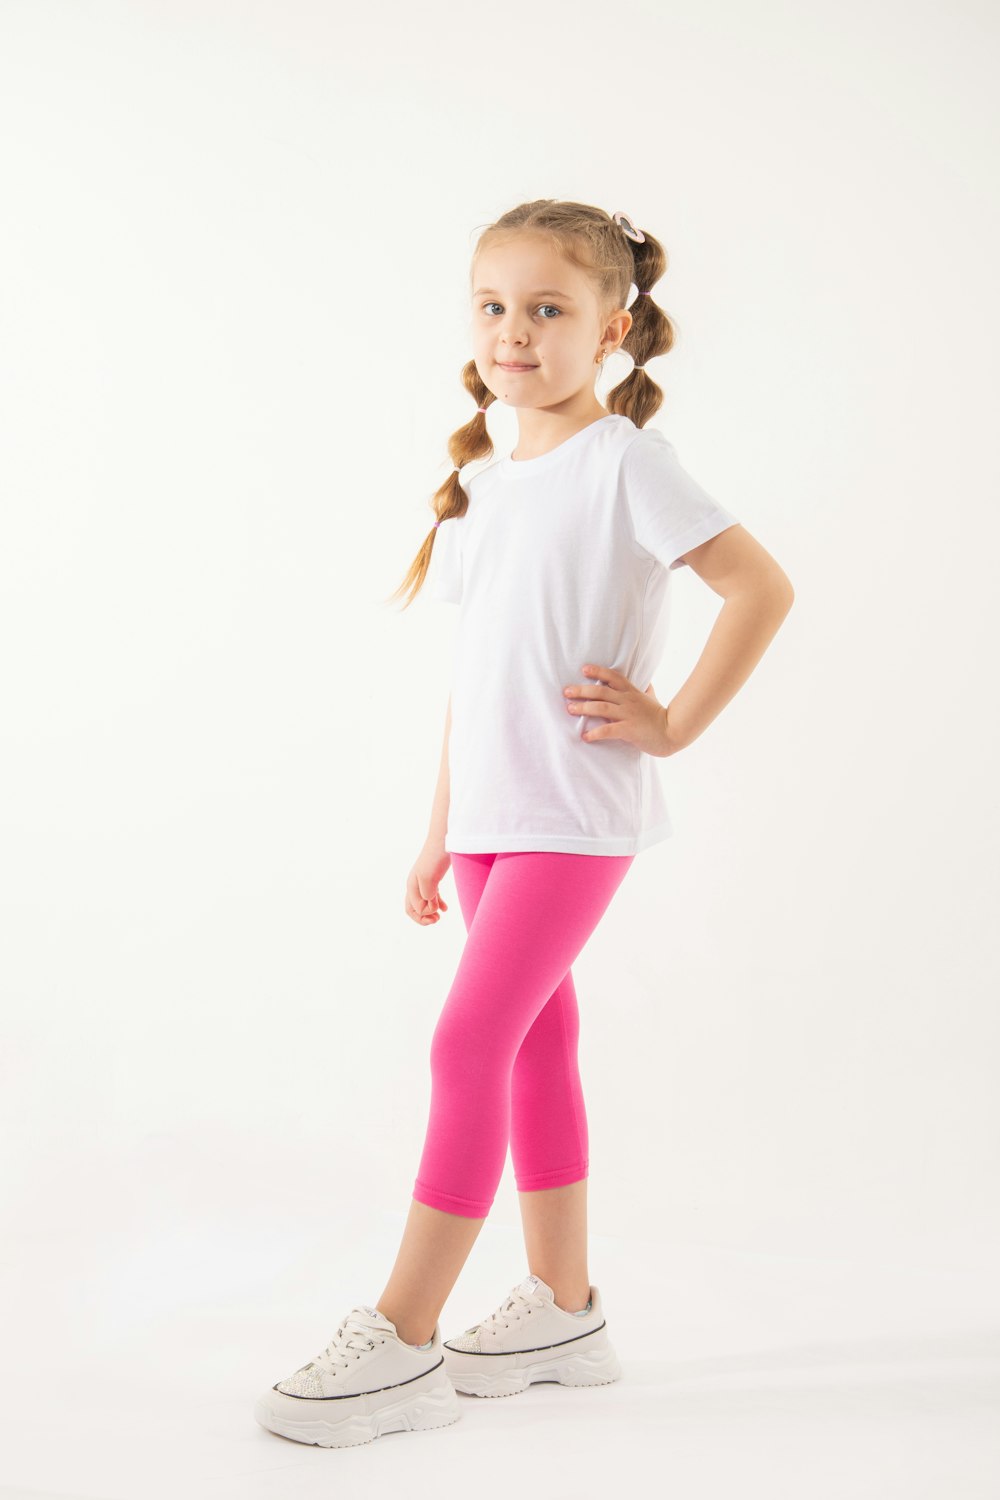 A little girl in a white shirt and pink leggings photo – Free Beautiful  clothes Image on Unsplash